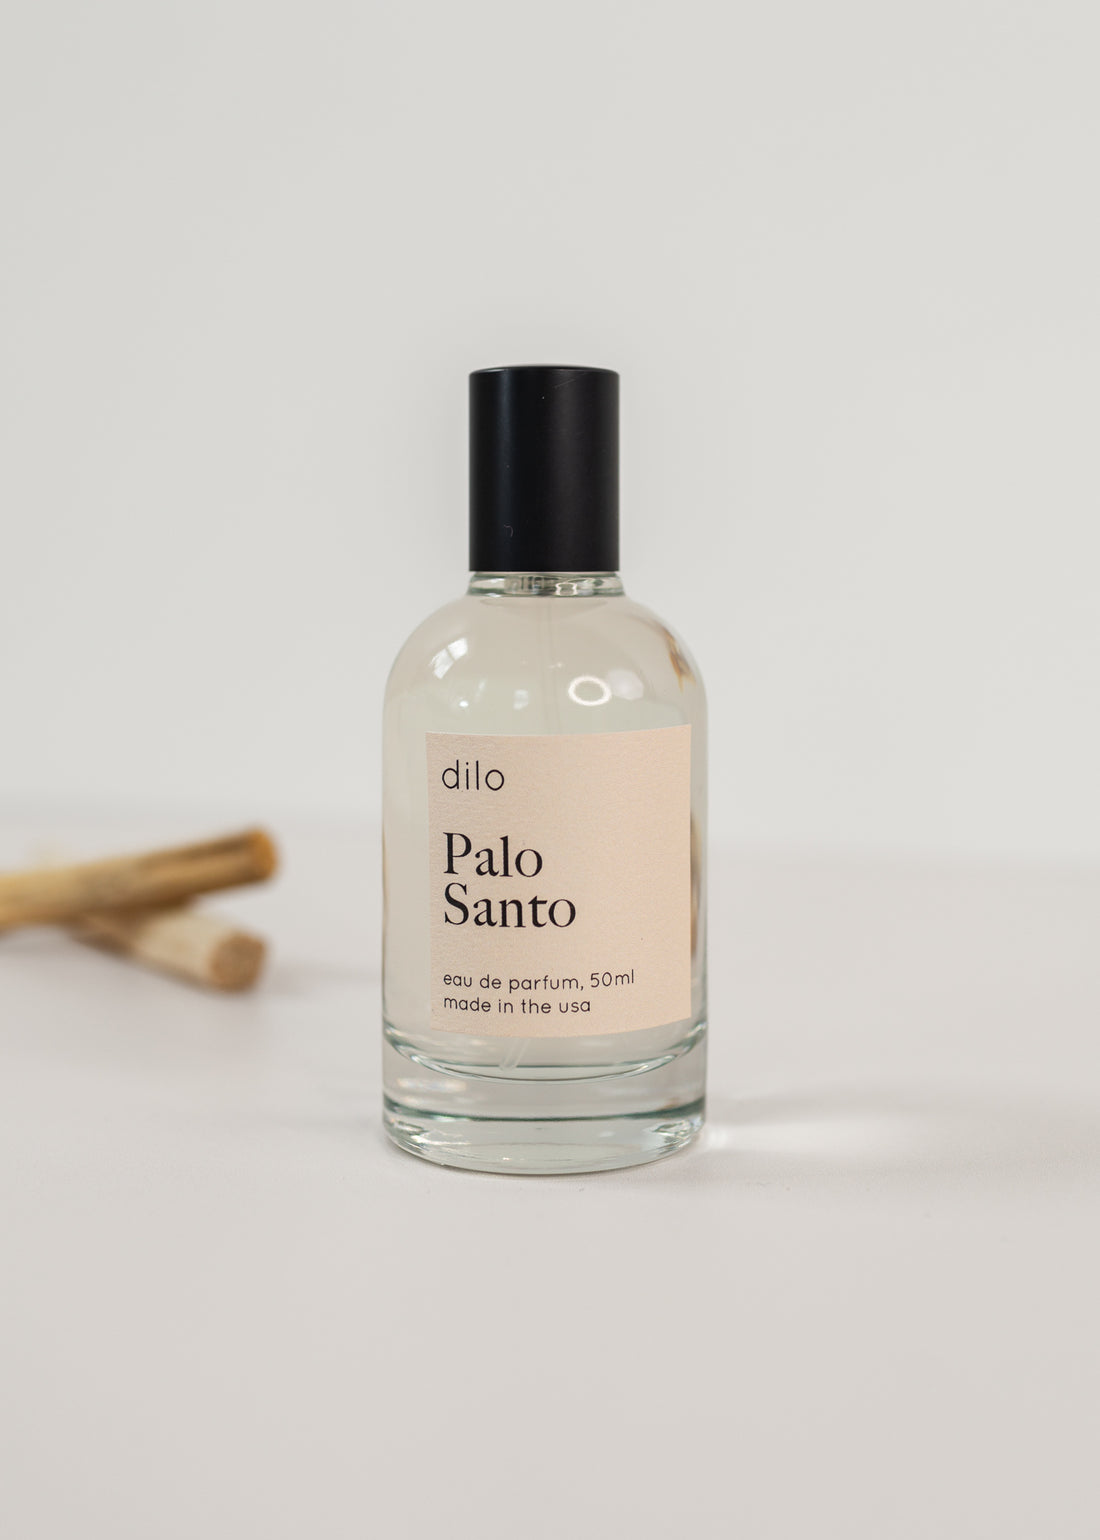 Perfume bottle on a white background with two sticks on palo santo in the background with a light pink label saying "Palo Santo"